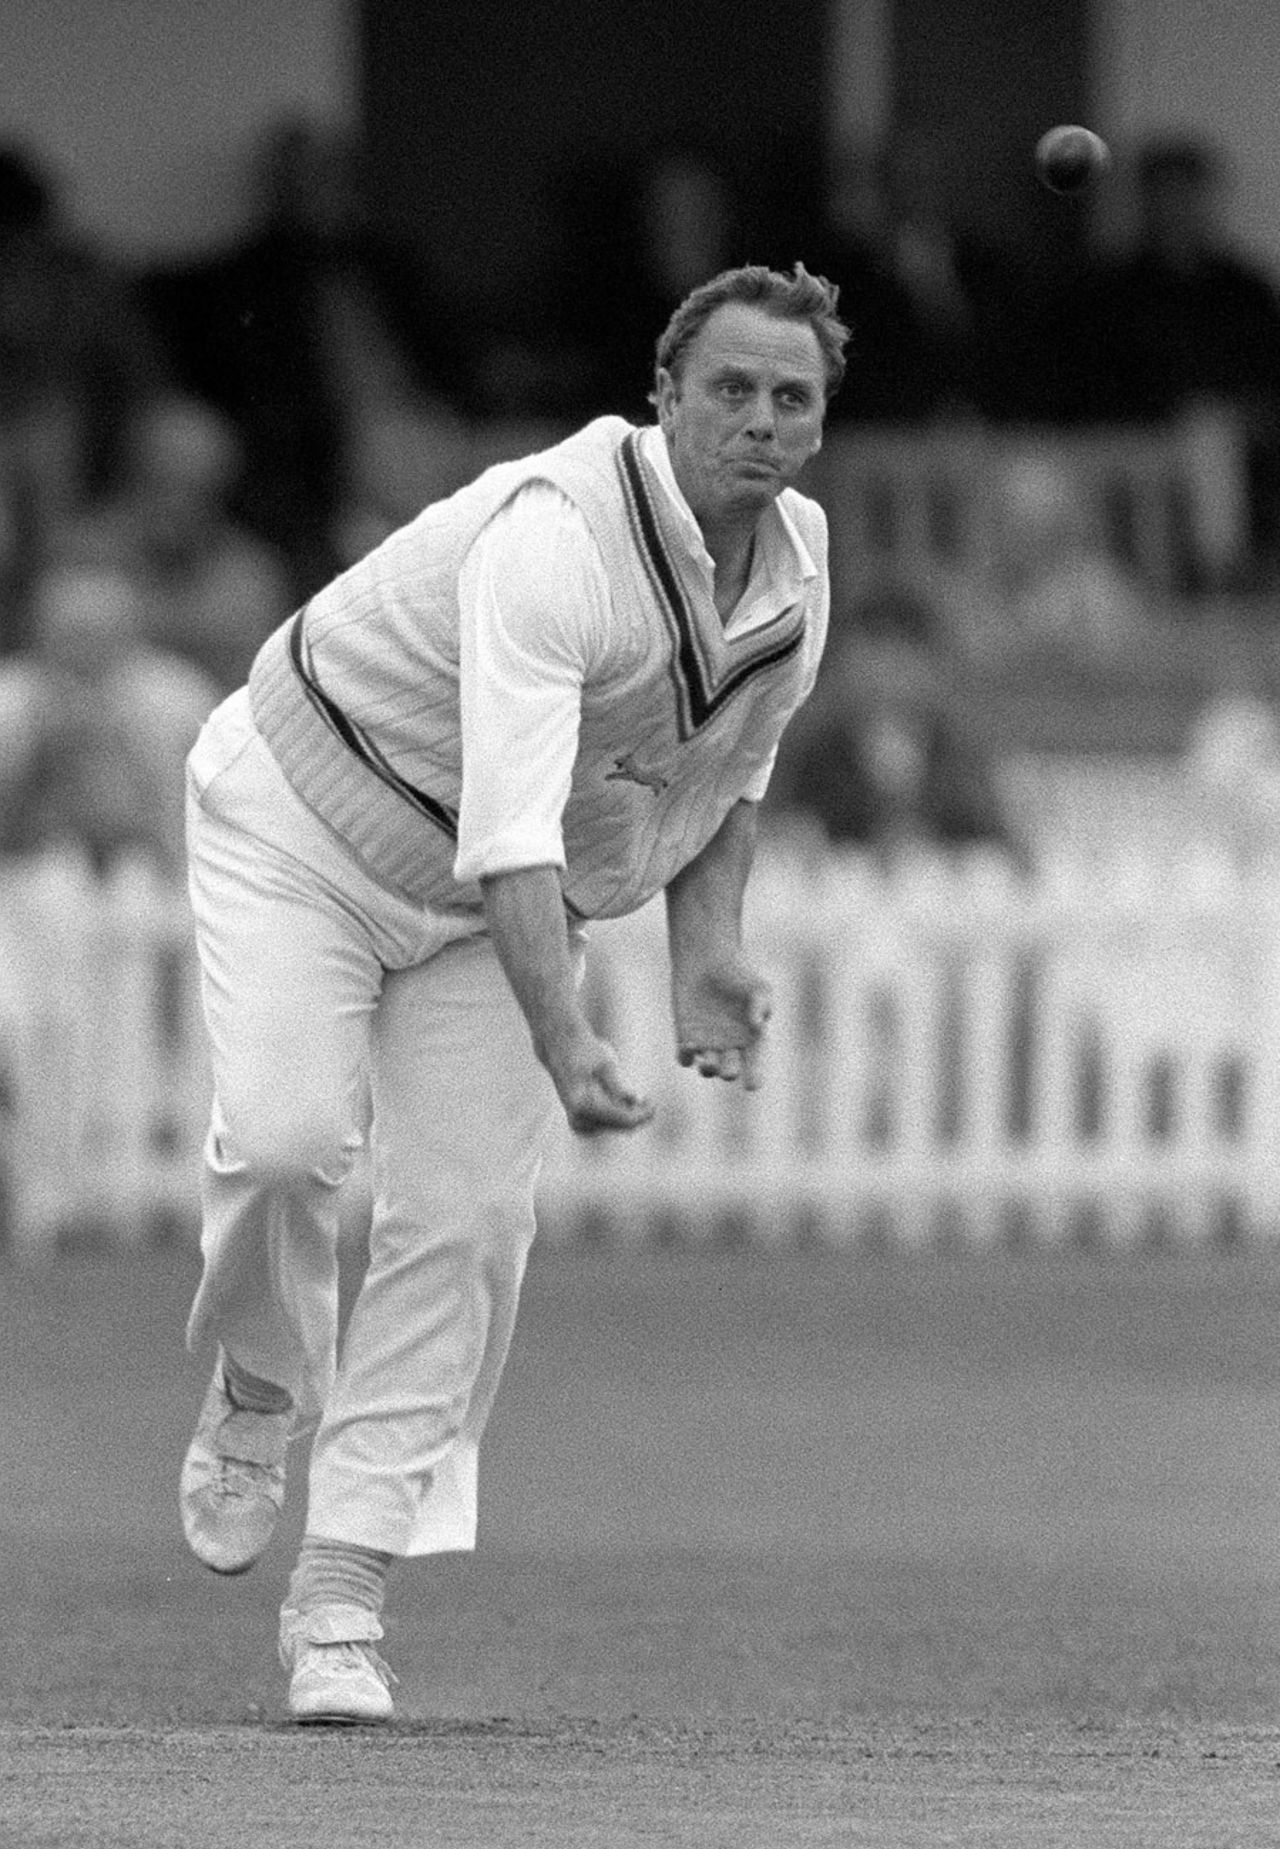 Ken Higgs delivers the ball during his final season as a player, aged 49, Leicestershire v Somerset, September 1, 1986